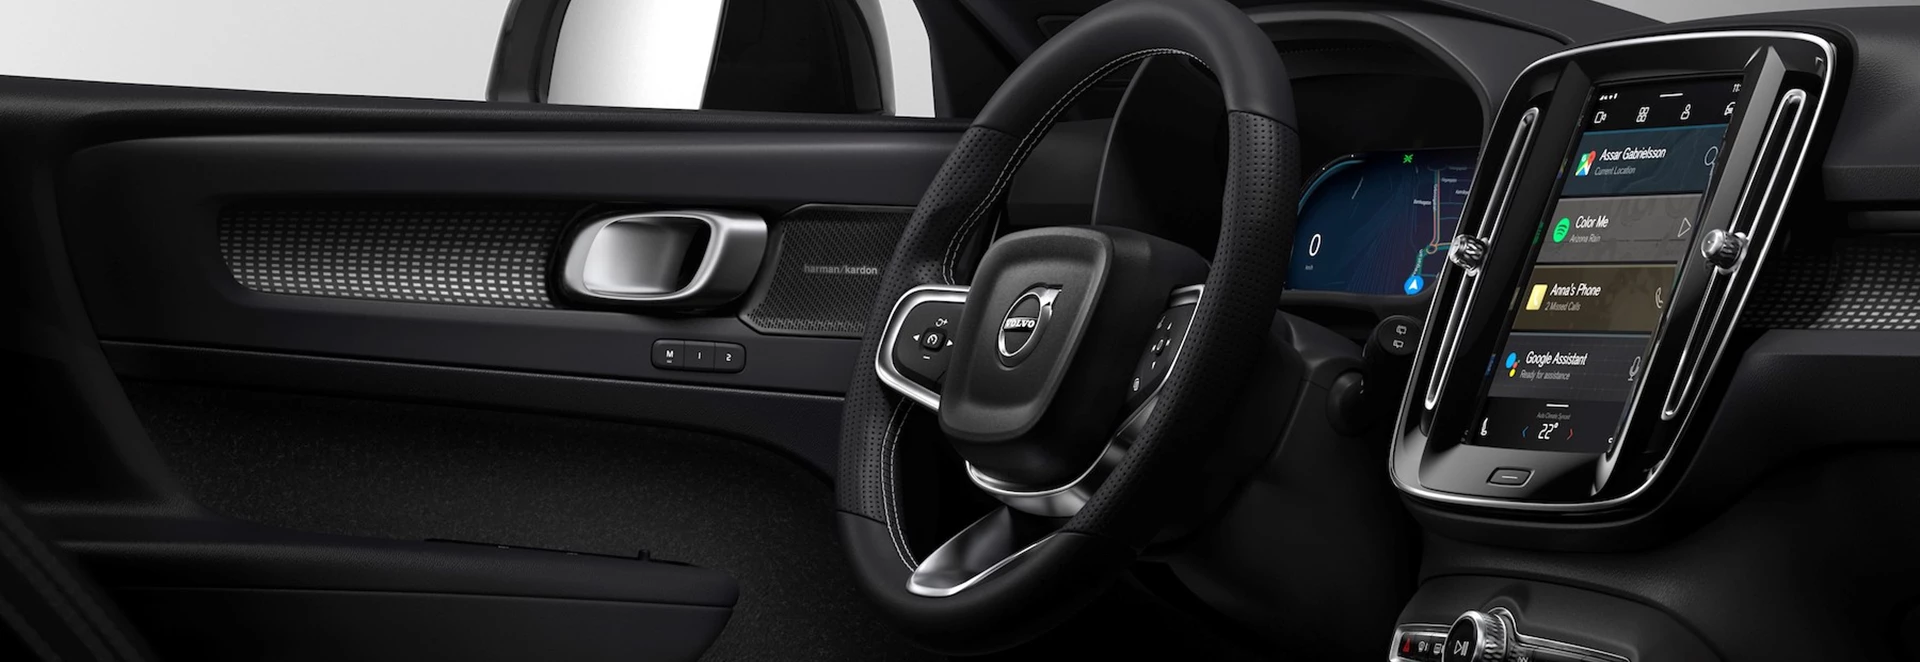 Volvo unveils new electric XC40’s Android infotainment system